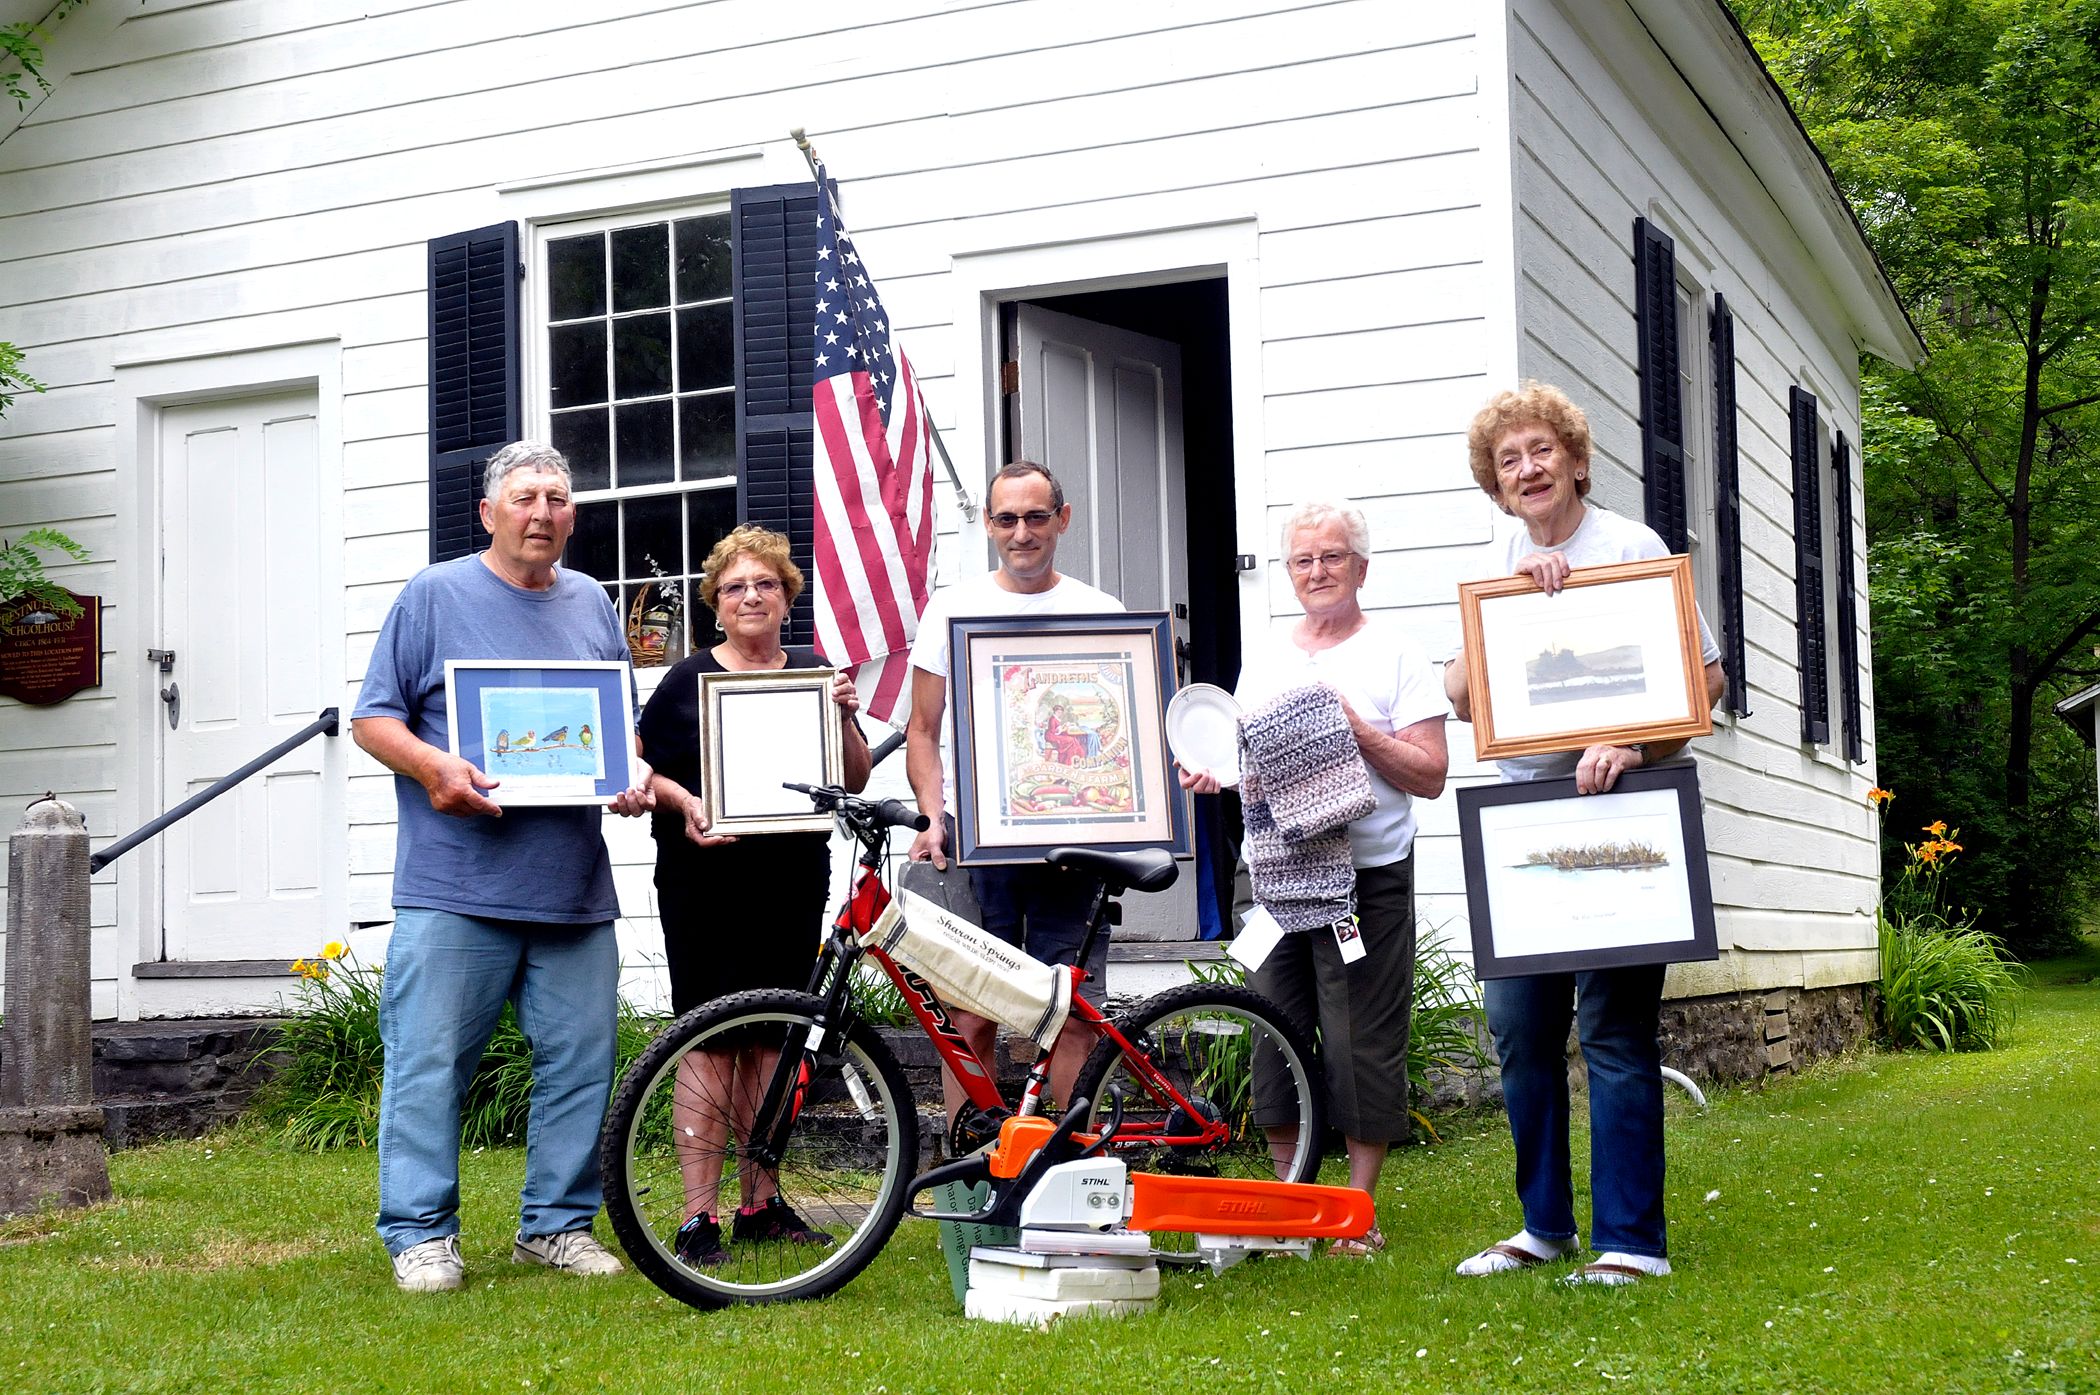 Sharon Historical Society plans one-of-a-kind auction